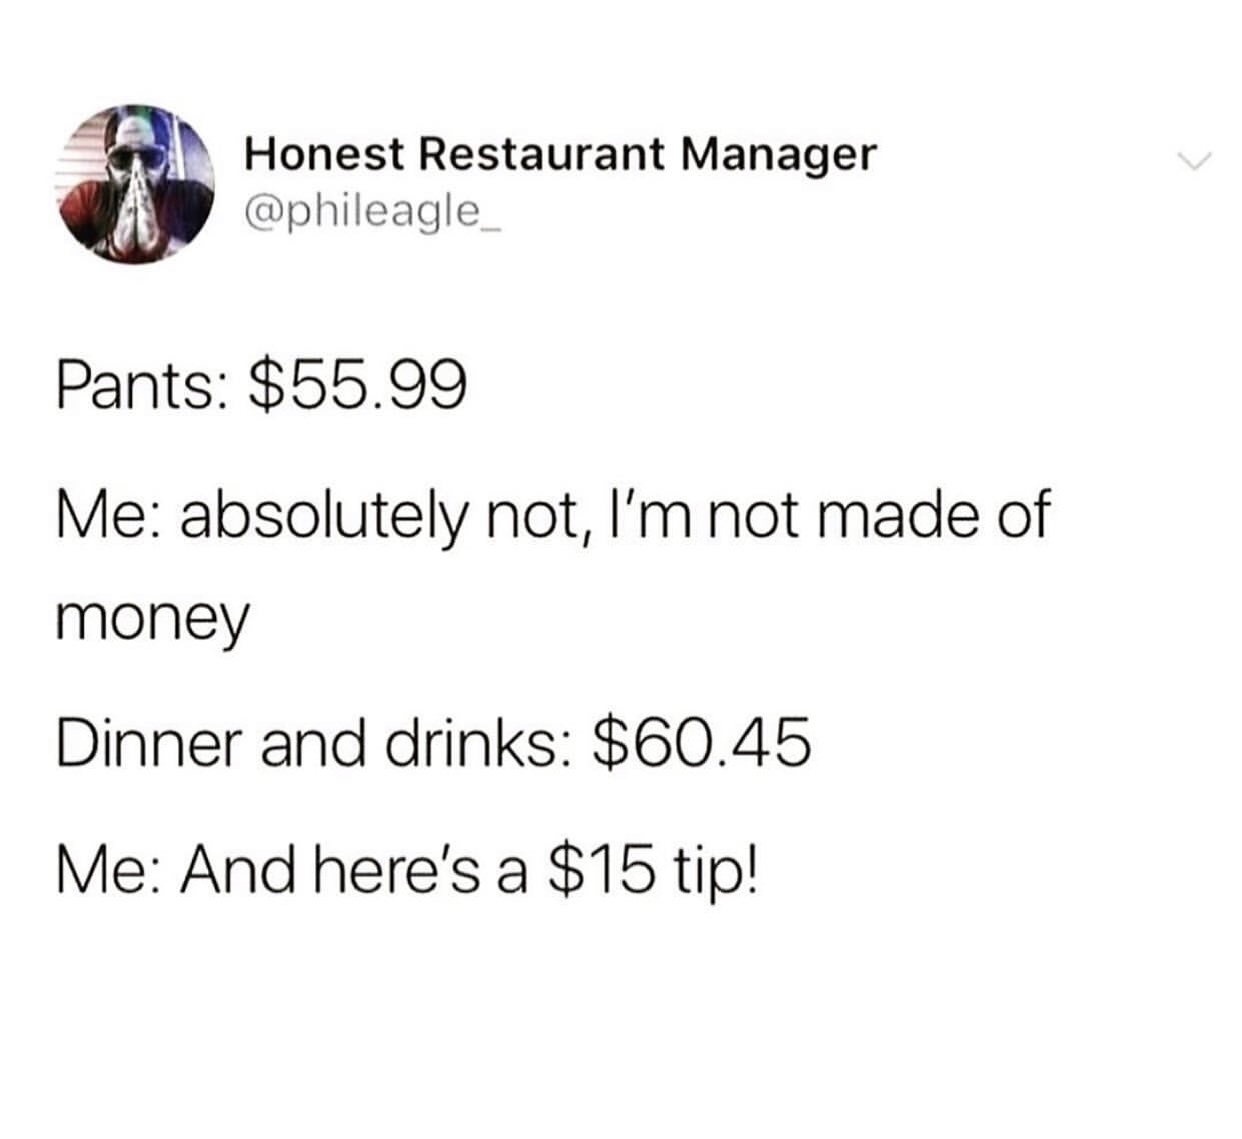 angle - Honest Restaurant Manager Pants $55.99 Me absolutely not, I'm not made of money Dinner and drinks $60.45 Me And here's a $15 tip!